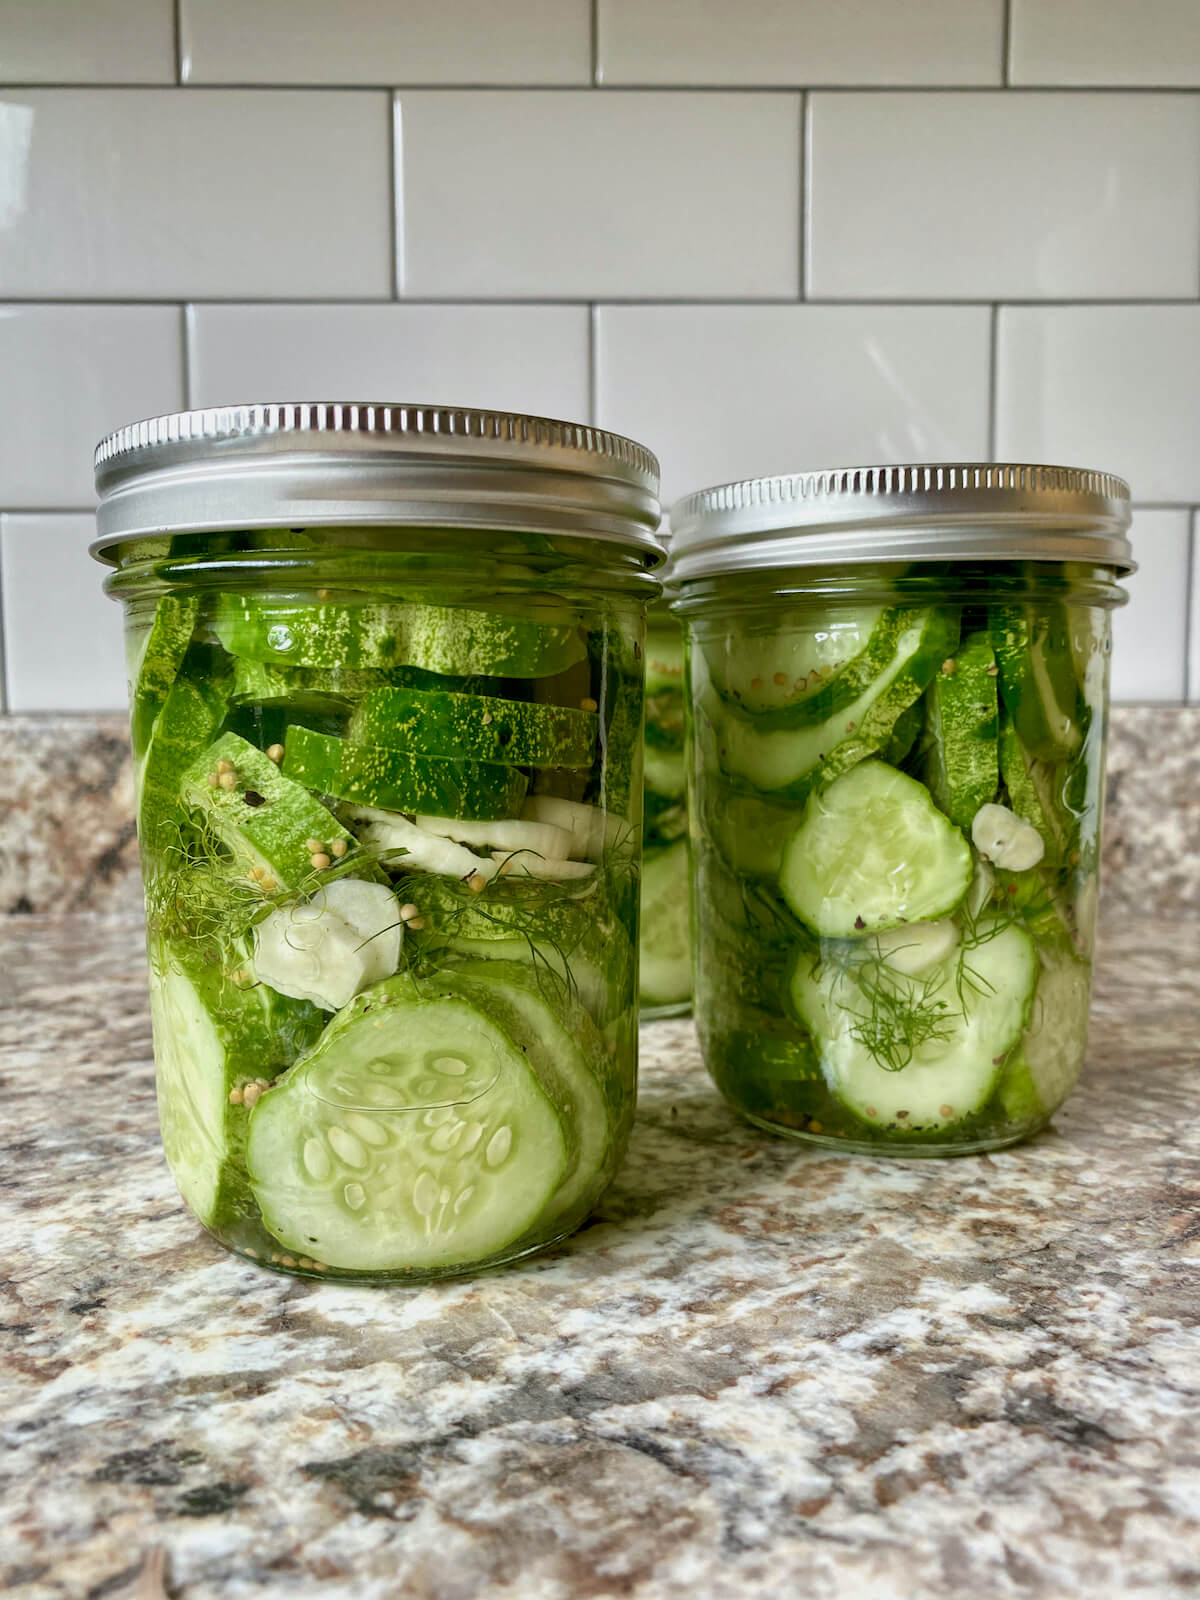 Closed mason jars filled with refrigerator dill pickles.